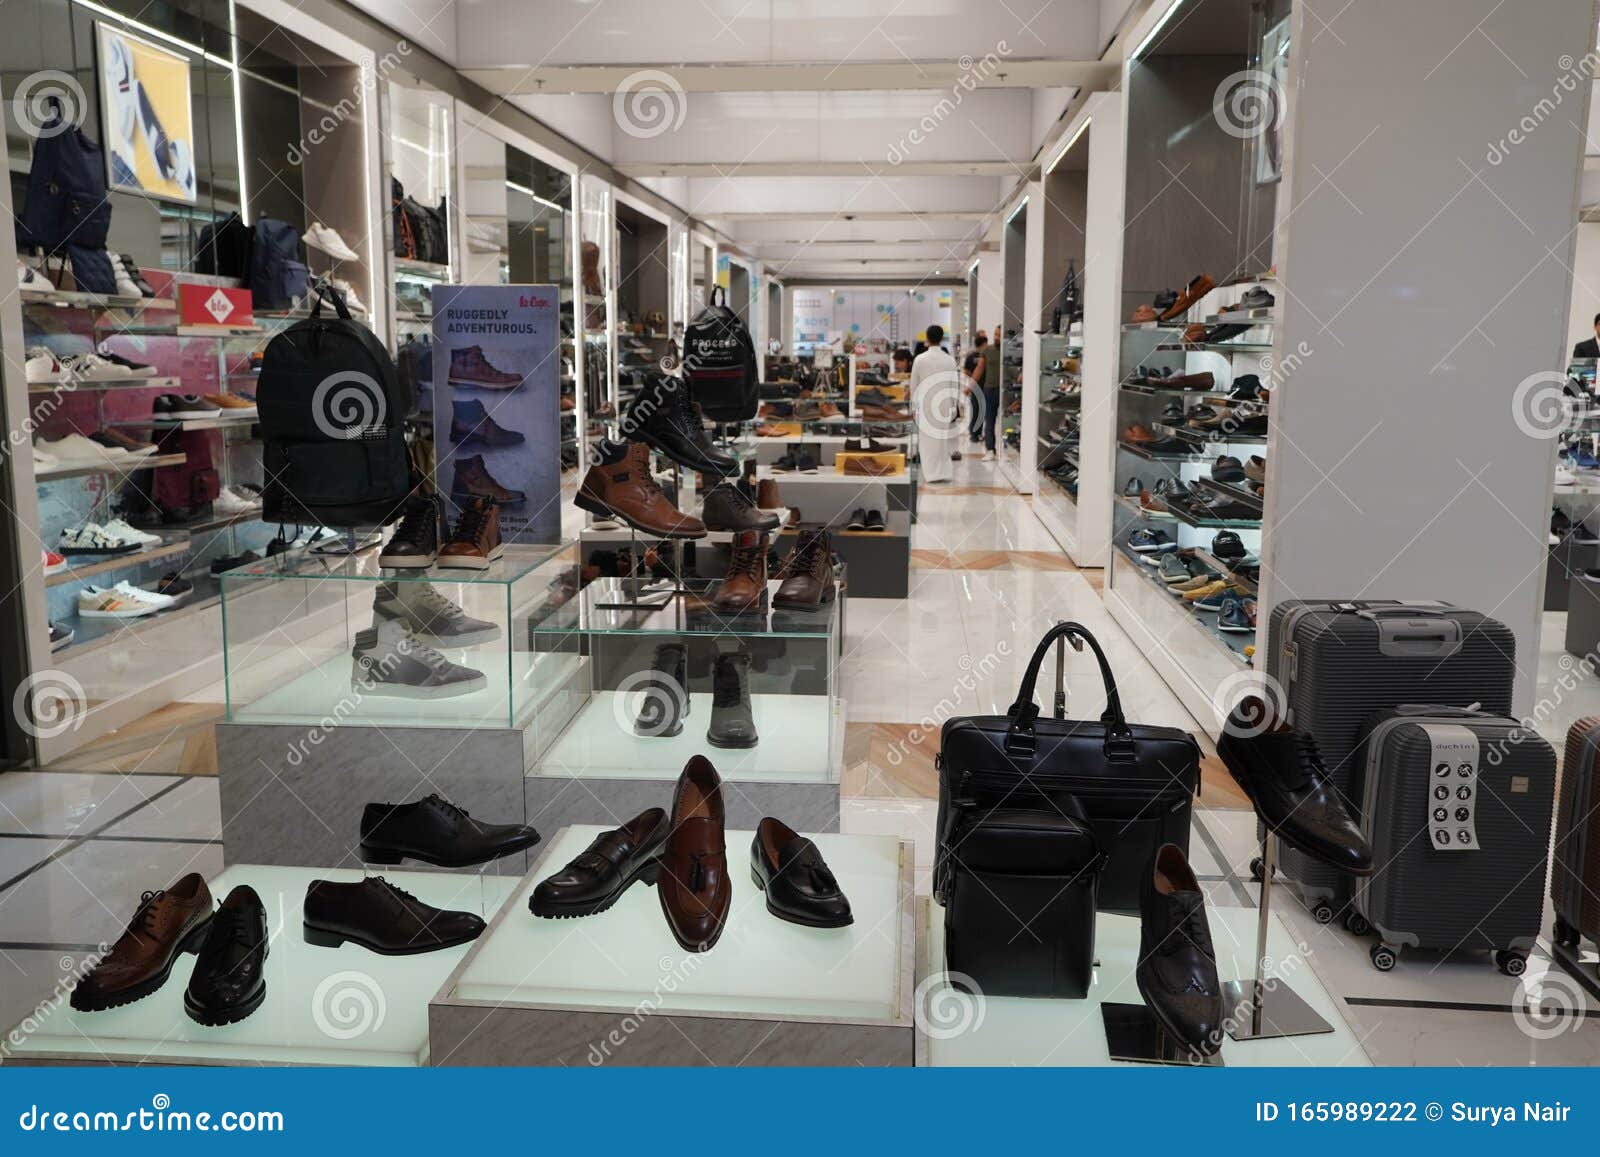 Dubai UAE December 2019 - Men Shoes in a Luxury Store. Set of Black and ...